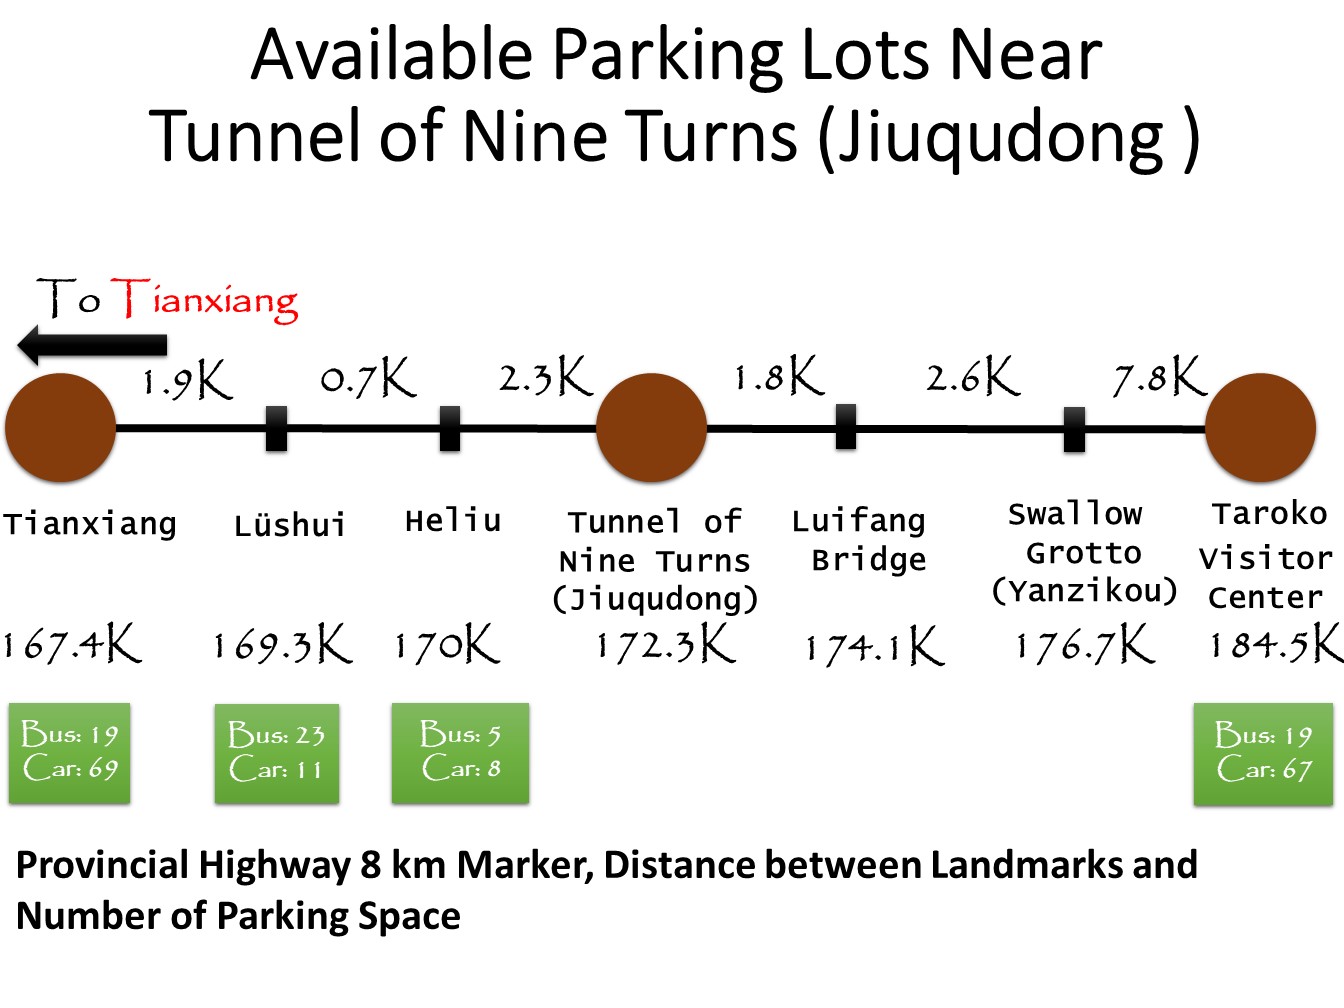 Available Parking Lots Near Tunnel of Nine Turns